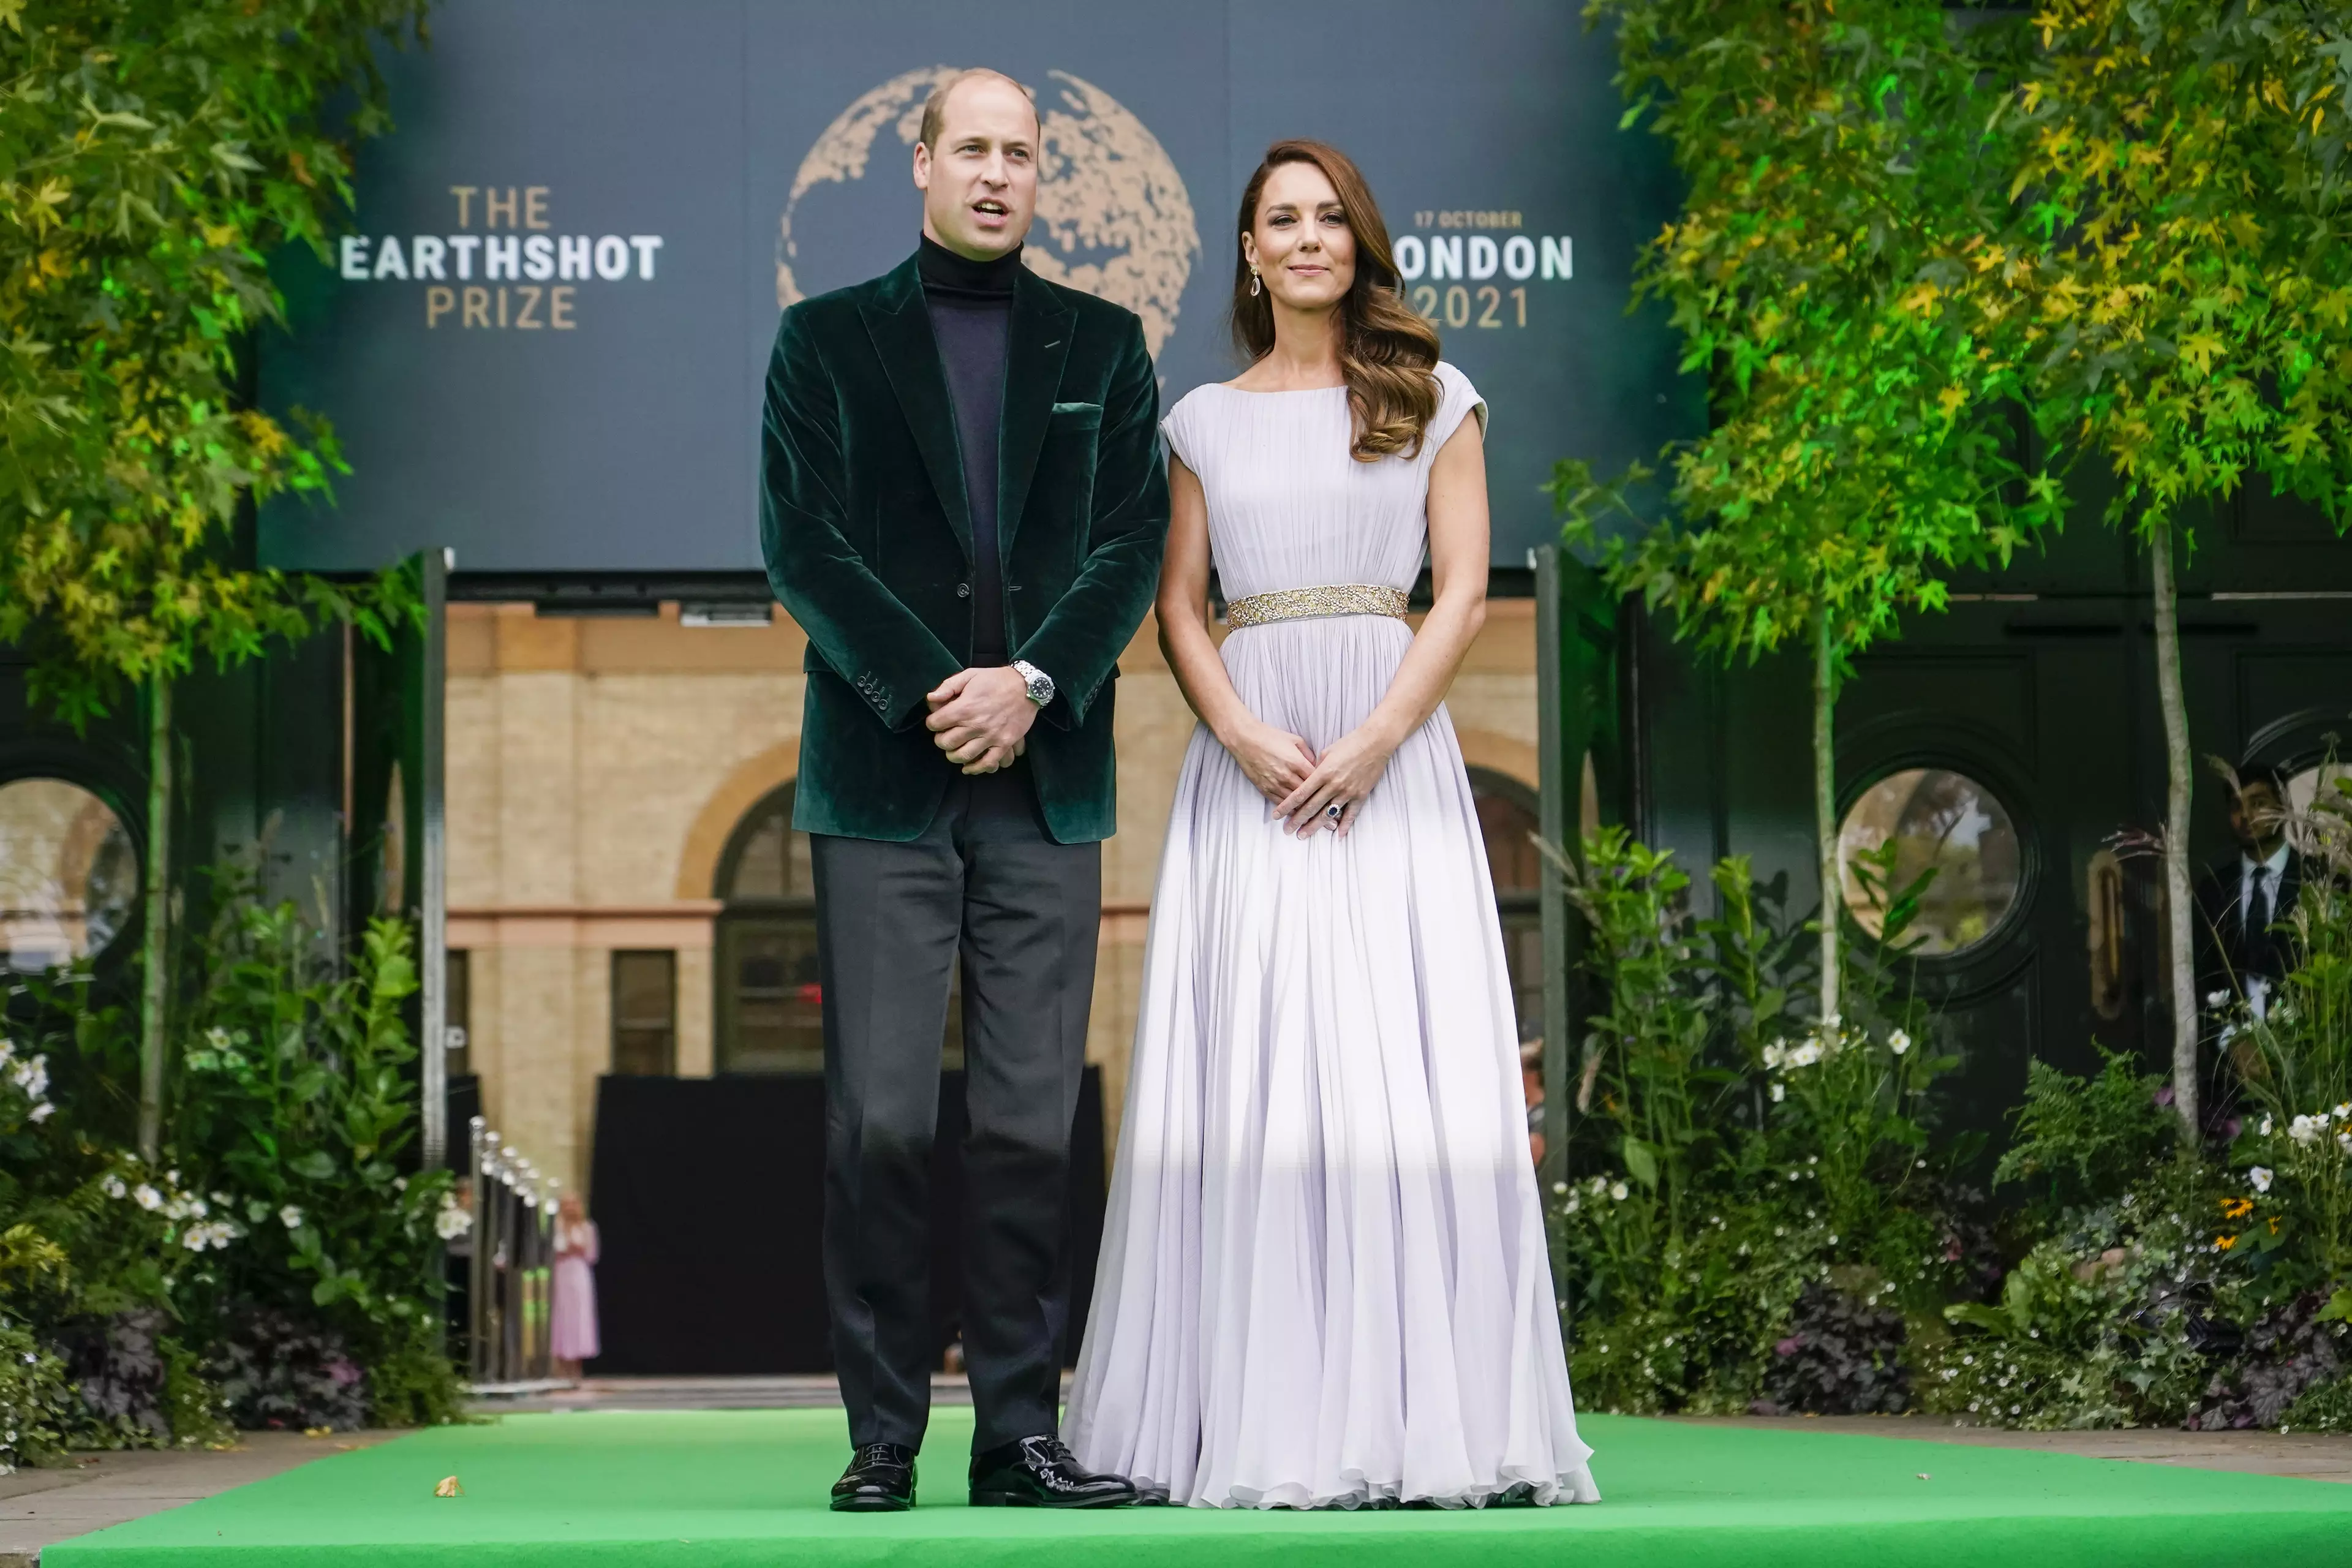 Prince William and Kate Middleton arriving at the Earthshot Awards 2021. (